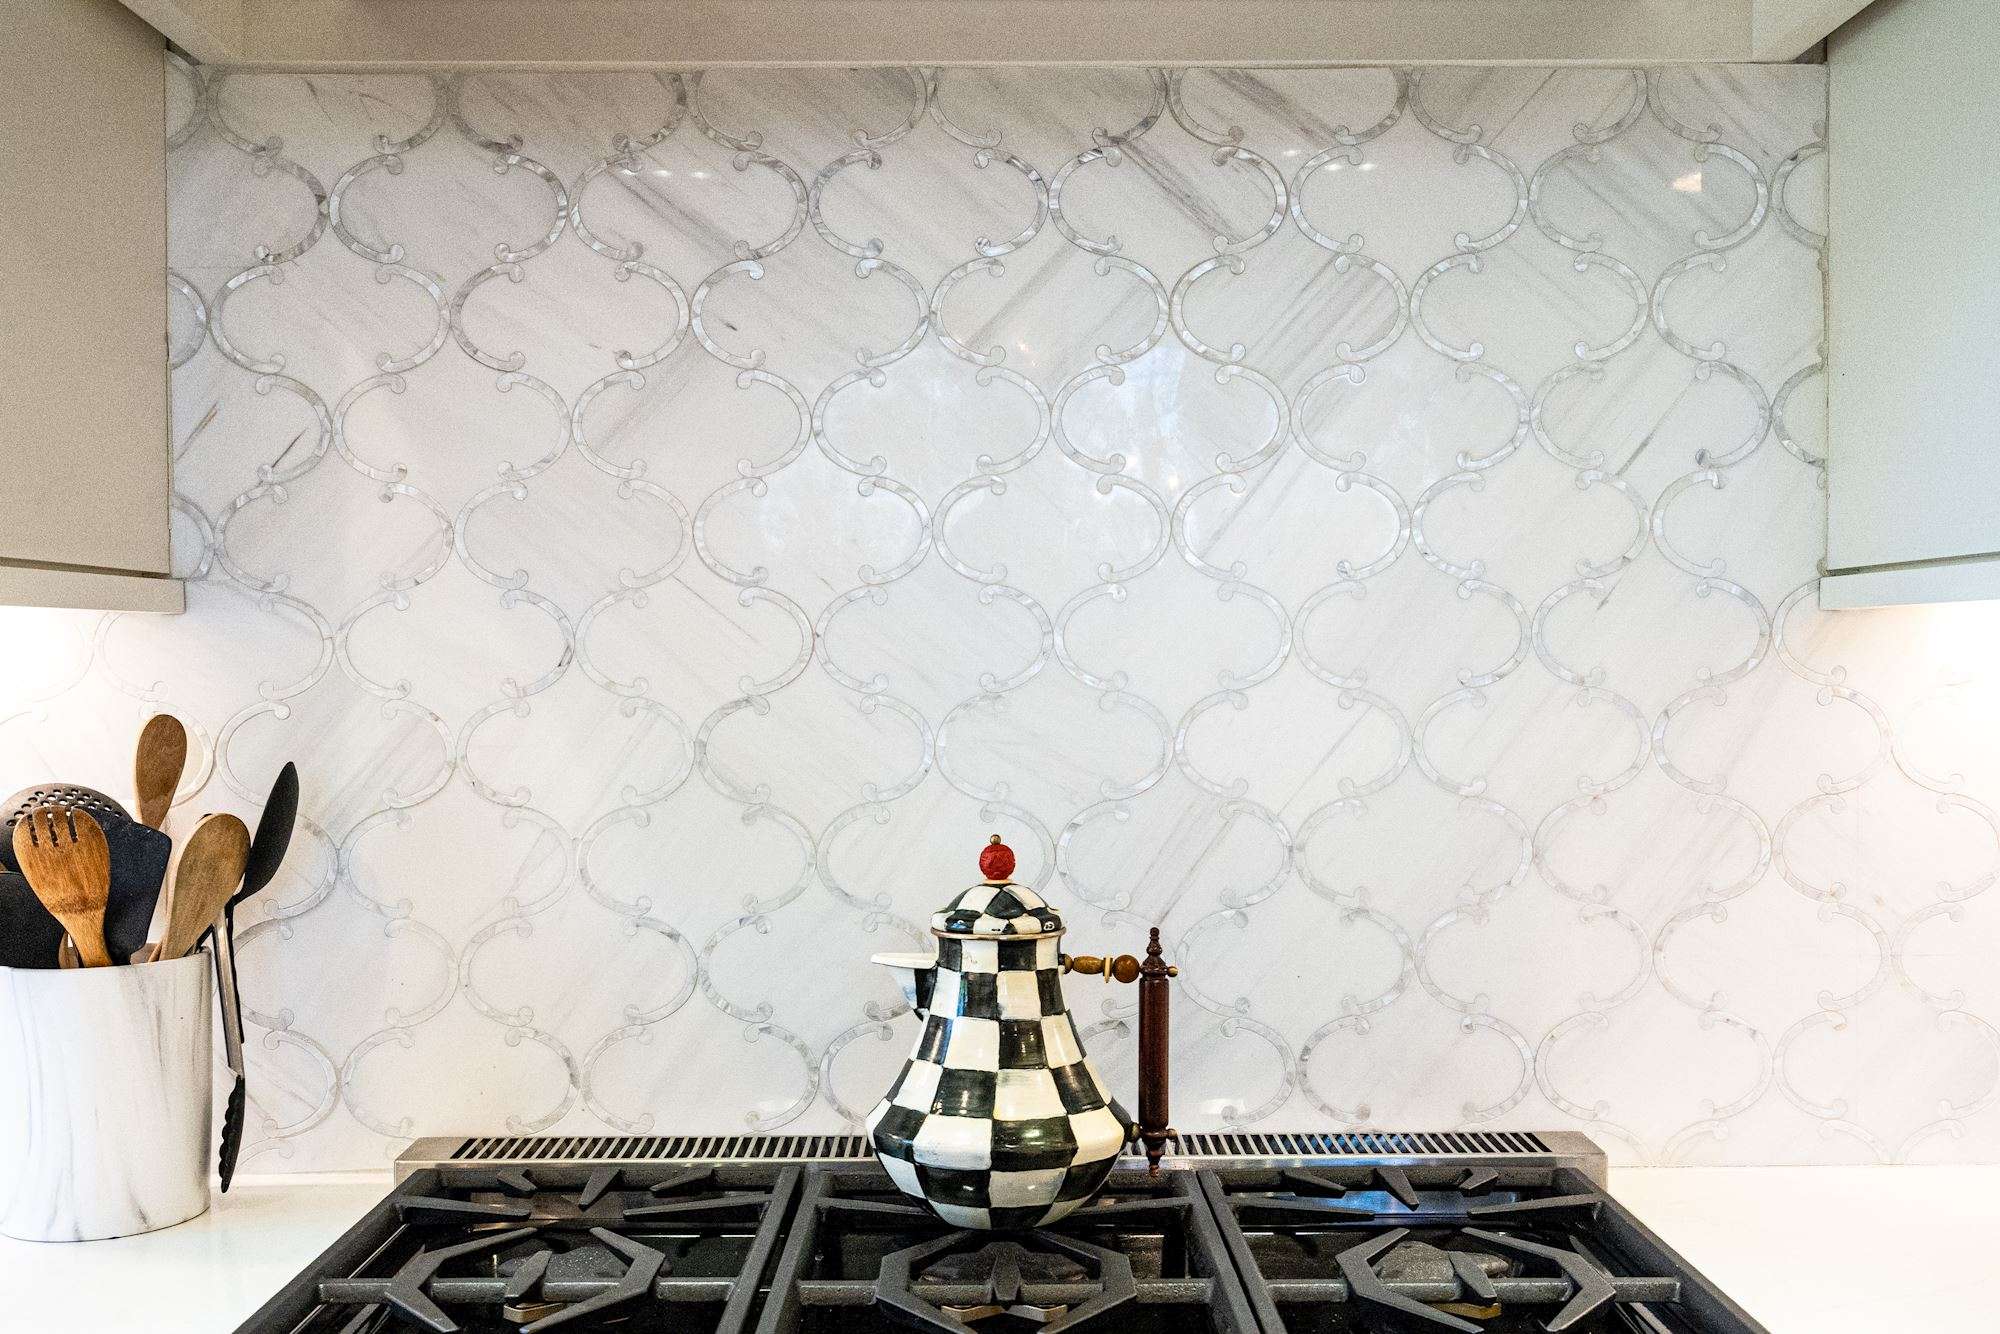 A Wallpaper Backsplash For Your Kitchen! - Driven by Decor